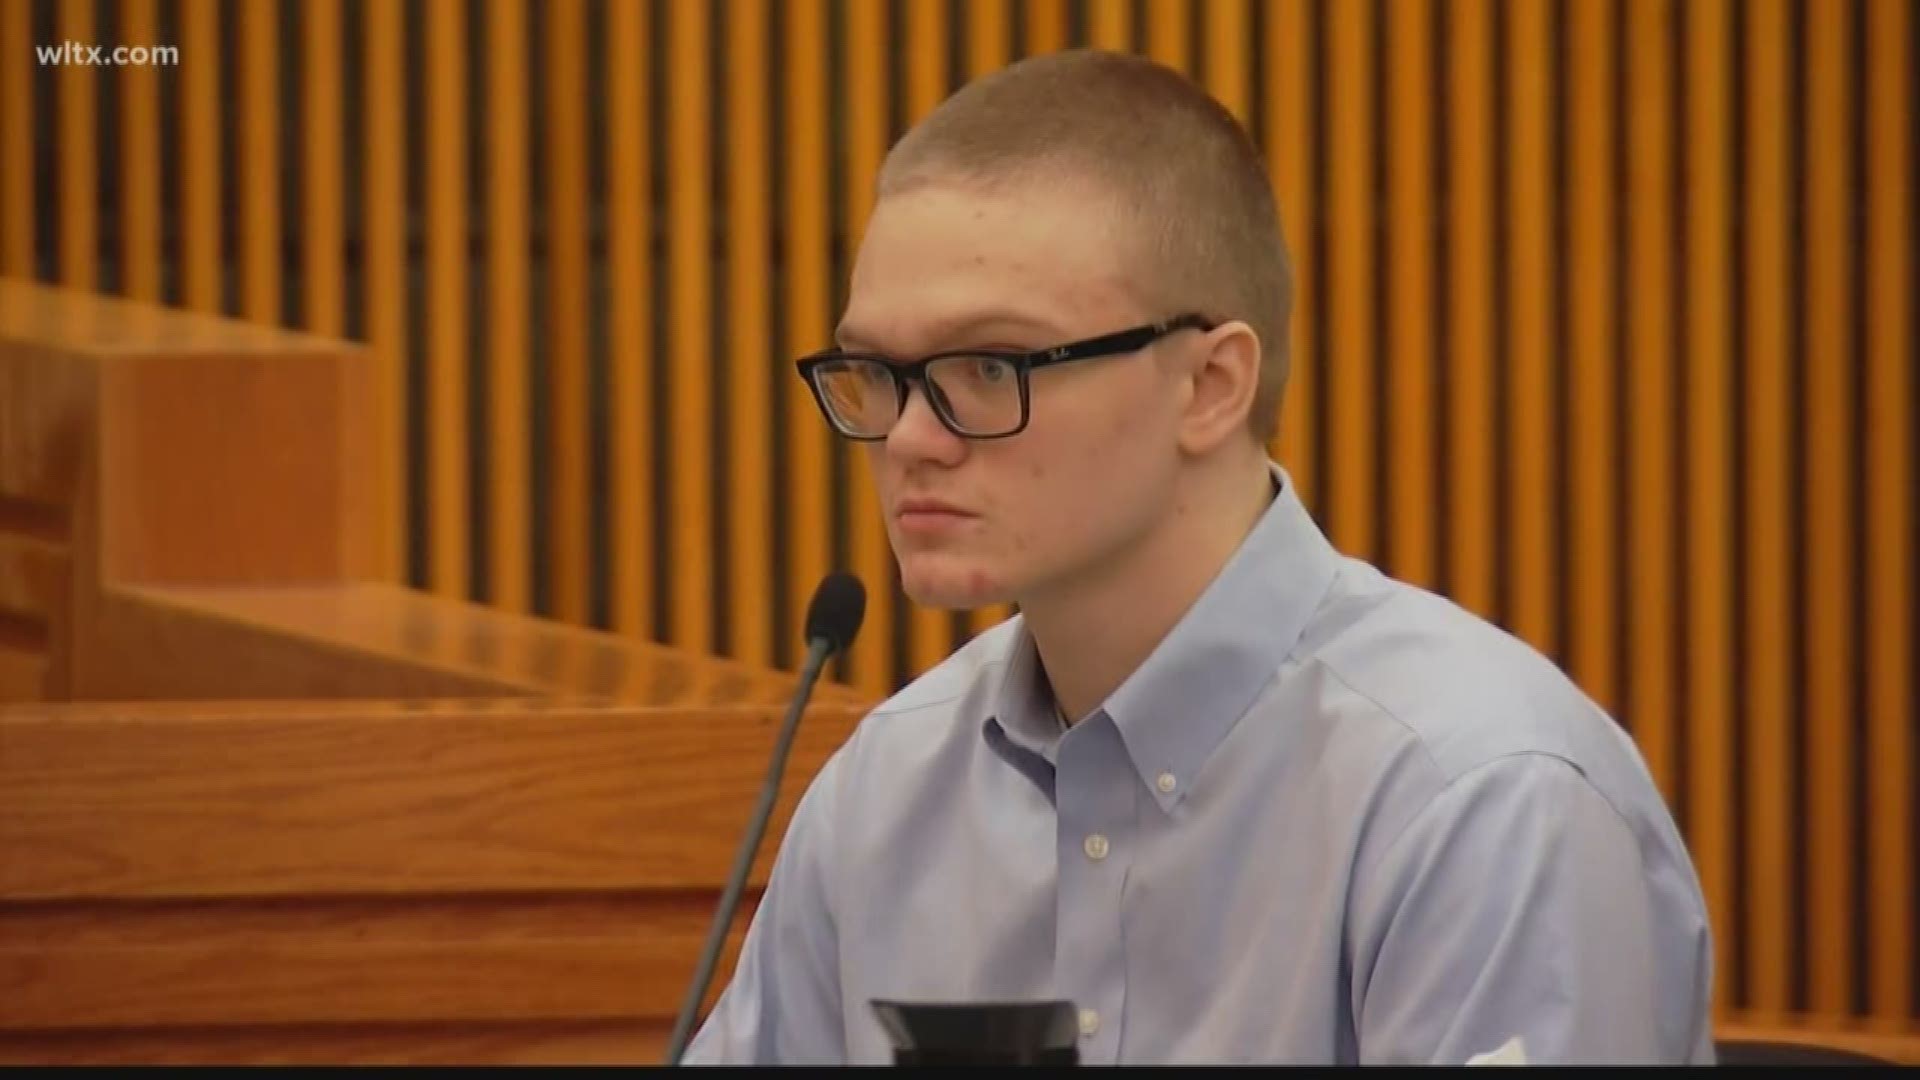 Townville elementary school shooter Jesse Osborne, 17,  has been sentenced to life in prison without parole